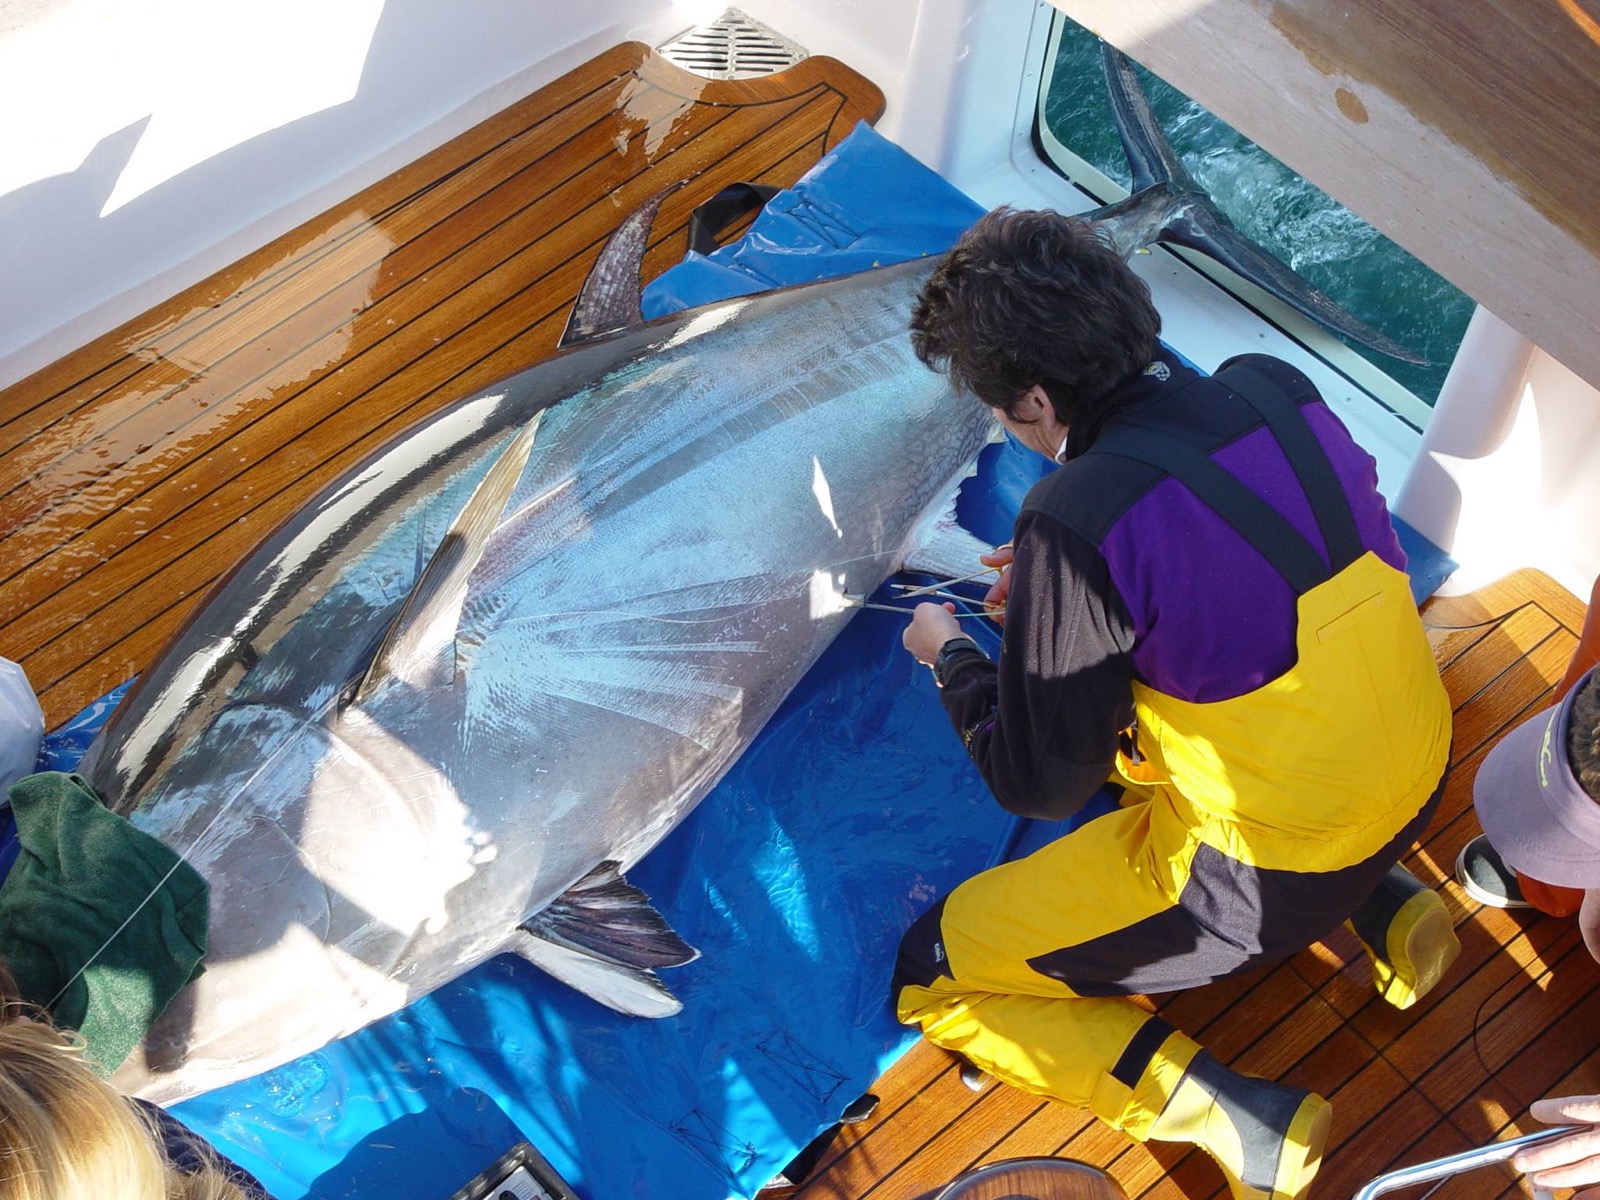 A very large grey iridescent fish lays on a bue tarp placed on the wooden deck of a boat. Its eyes are covered by a green towel. A woman in yellow waders and a purple shirt uses medical tools to insert a thin probe into the flesh of the fish near its anal fin.